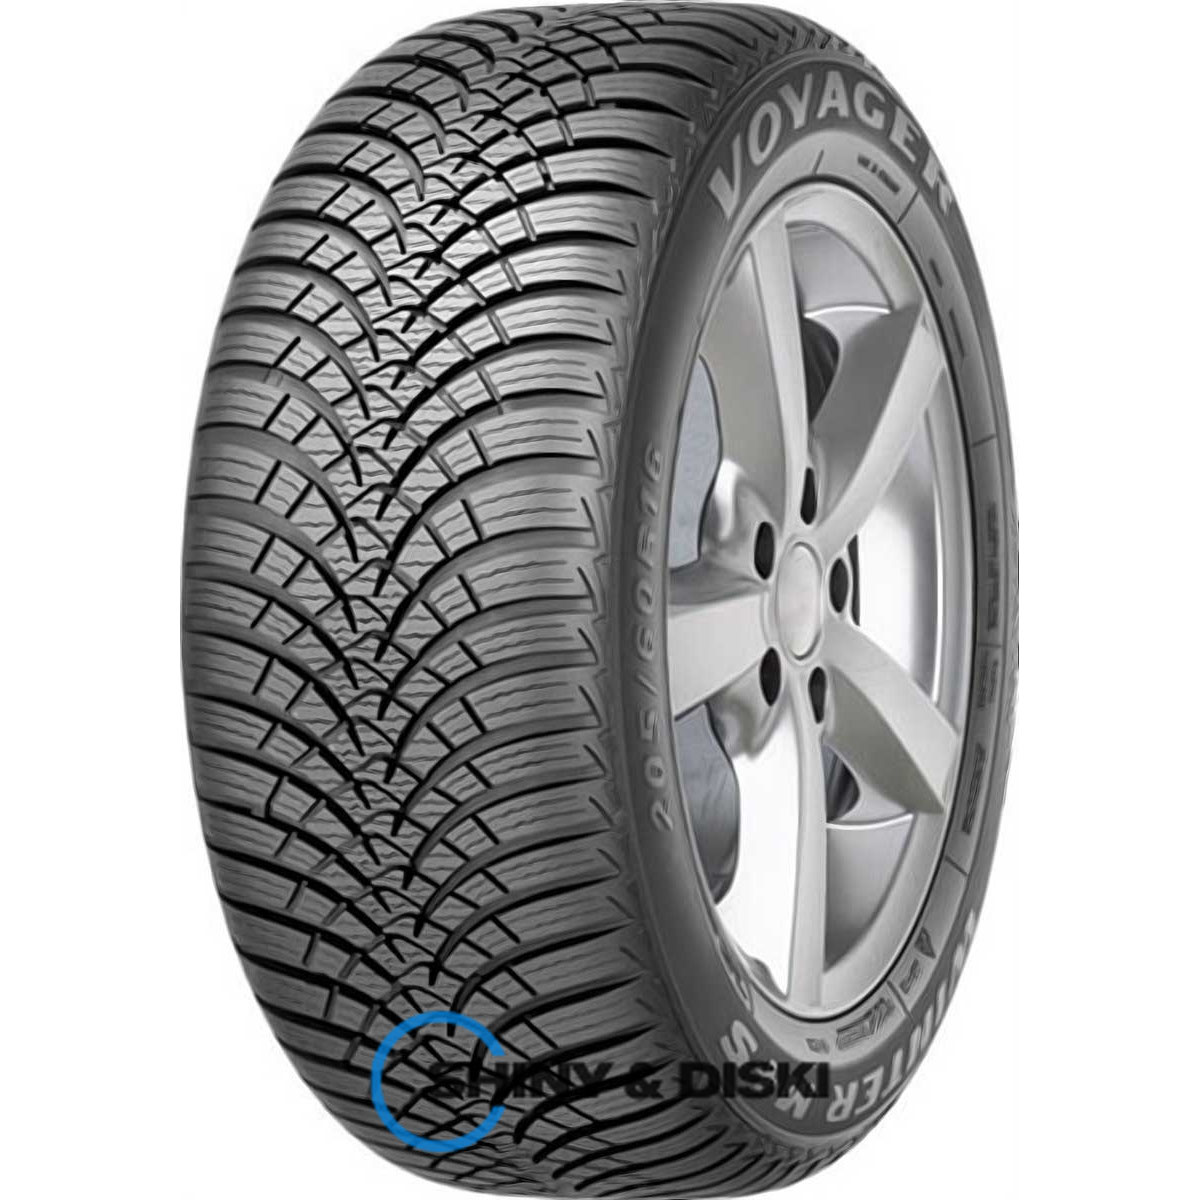 voyager winter 165/70 r13 79t